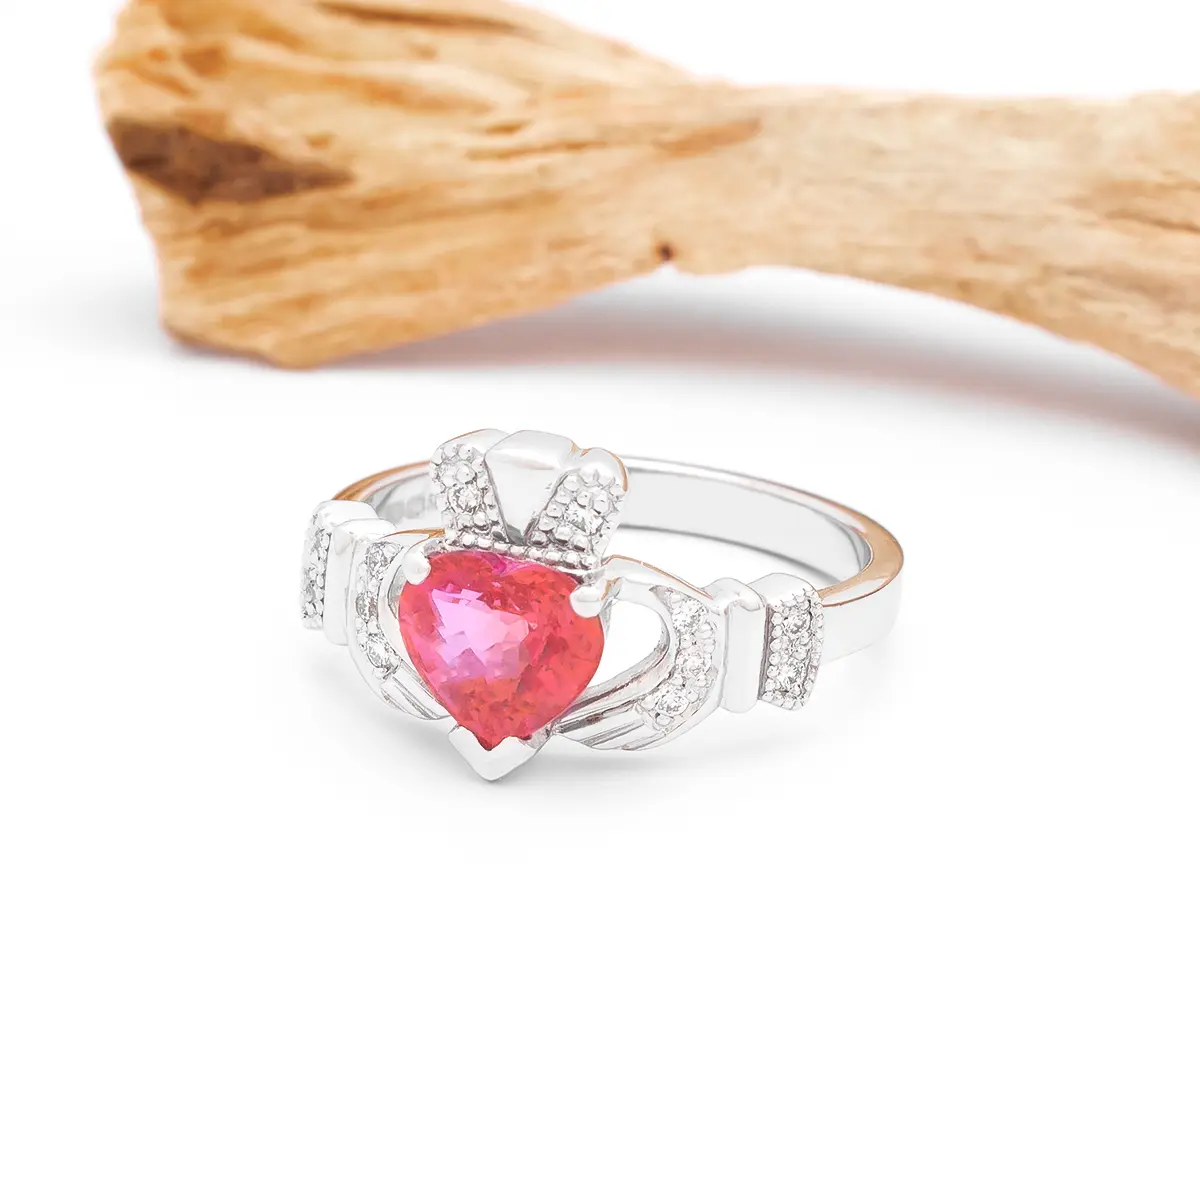 14K White Gold Claddagh Ring WIth Pink Sapphire Heart And Diamonds